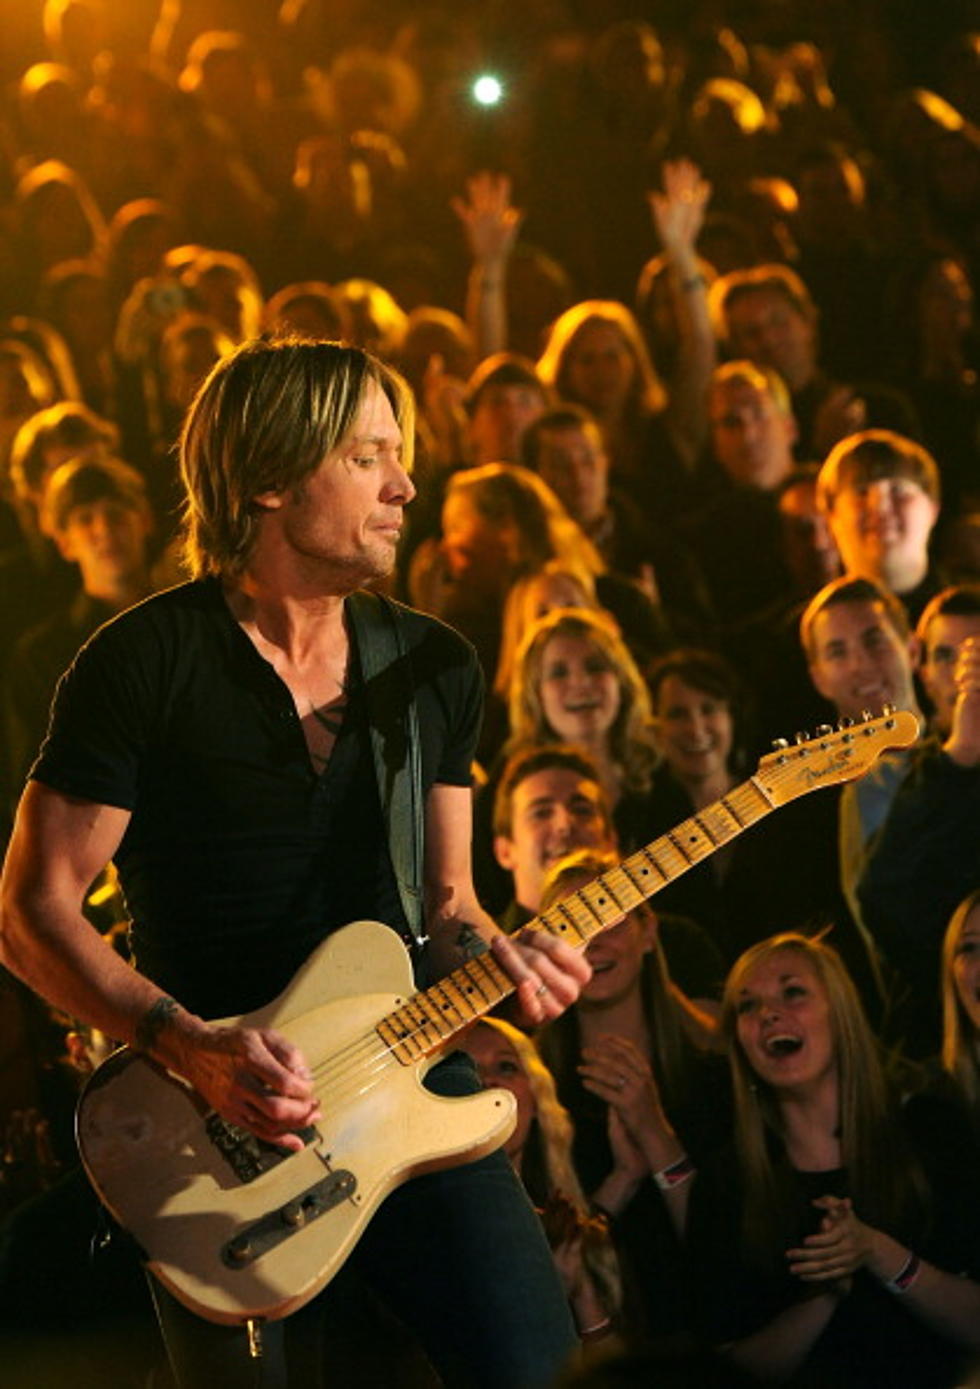 Keith Urban Gets Closer, Patsy Cline Falls To Pieces – Today In Country Music History [VIDEO]